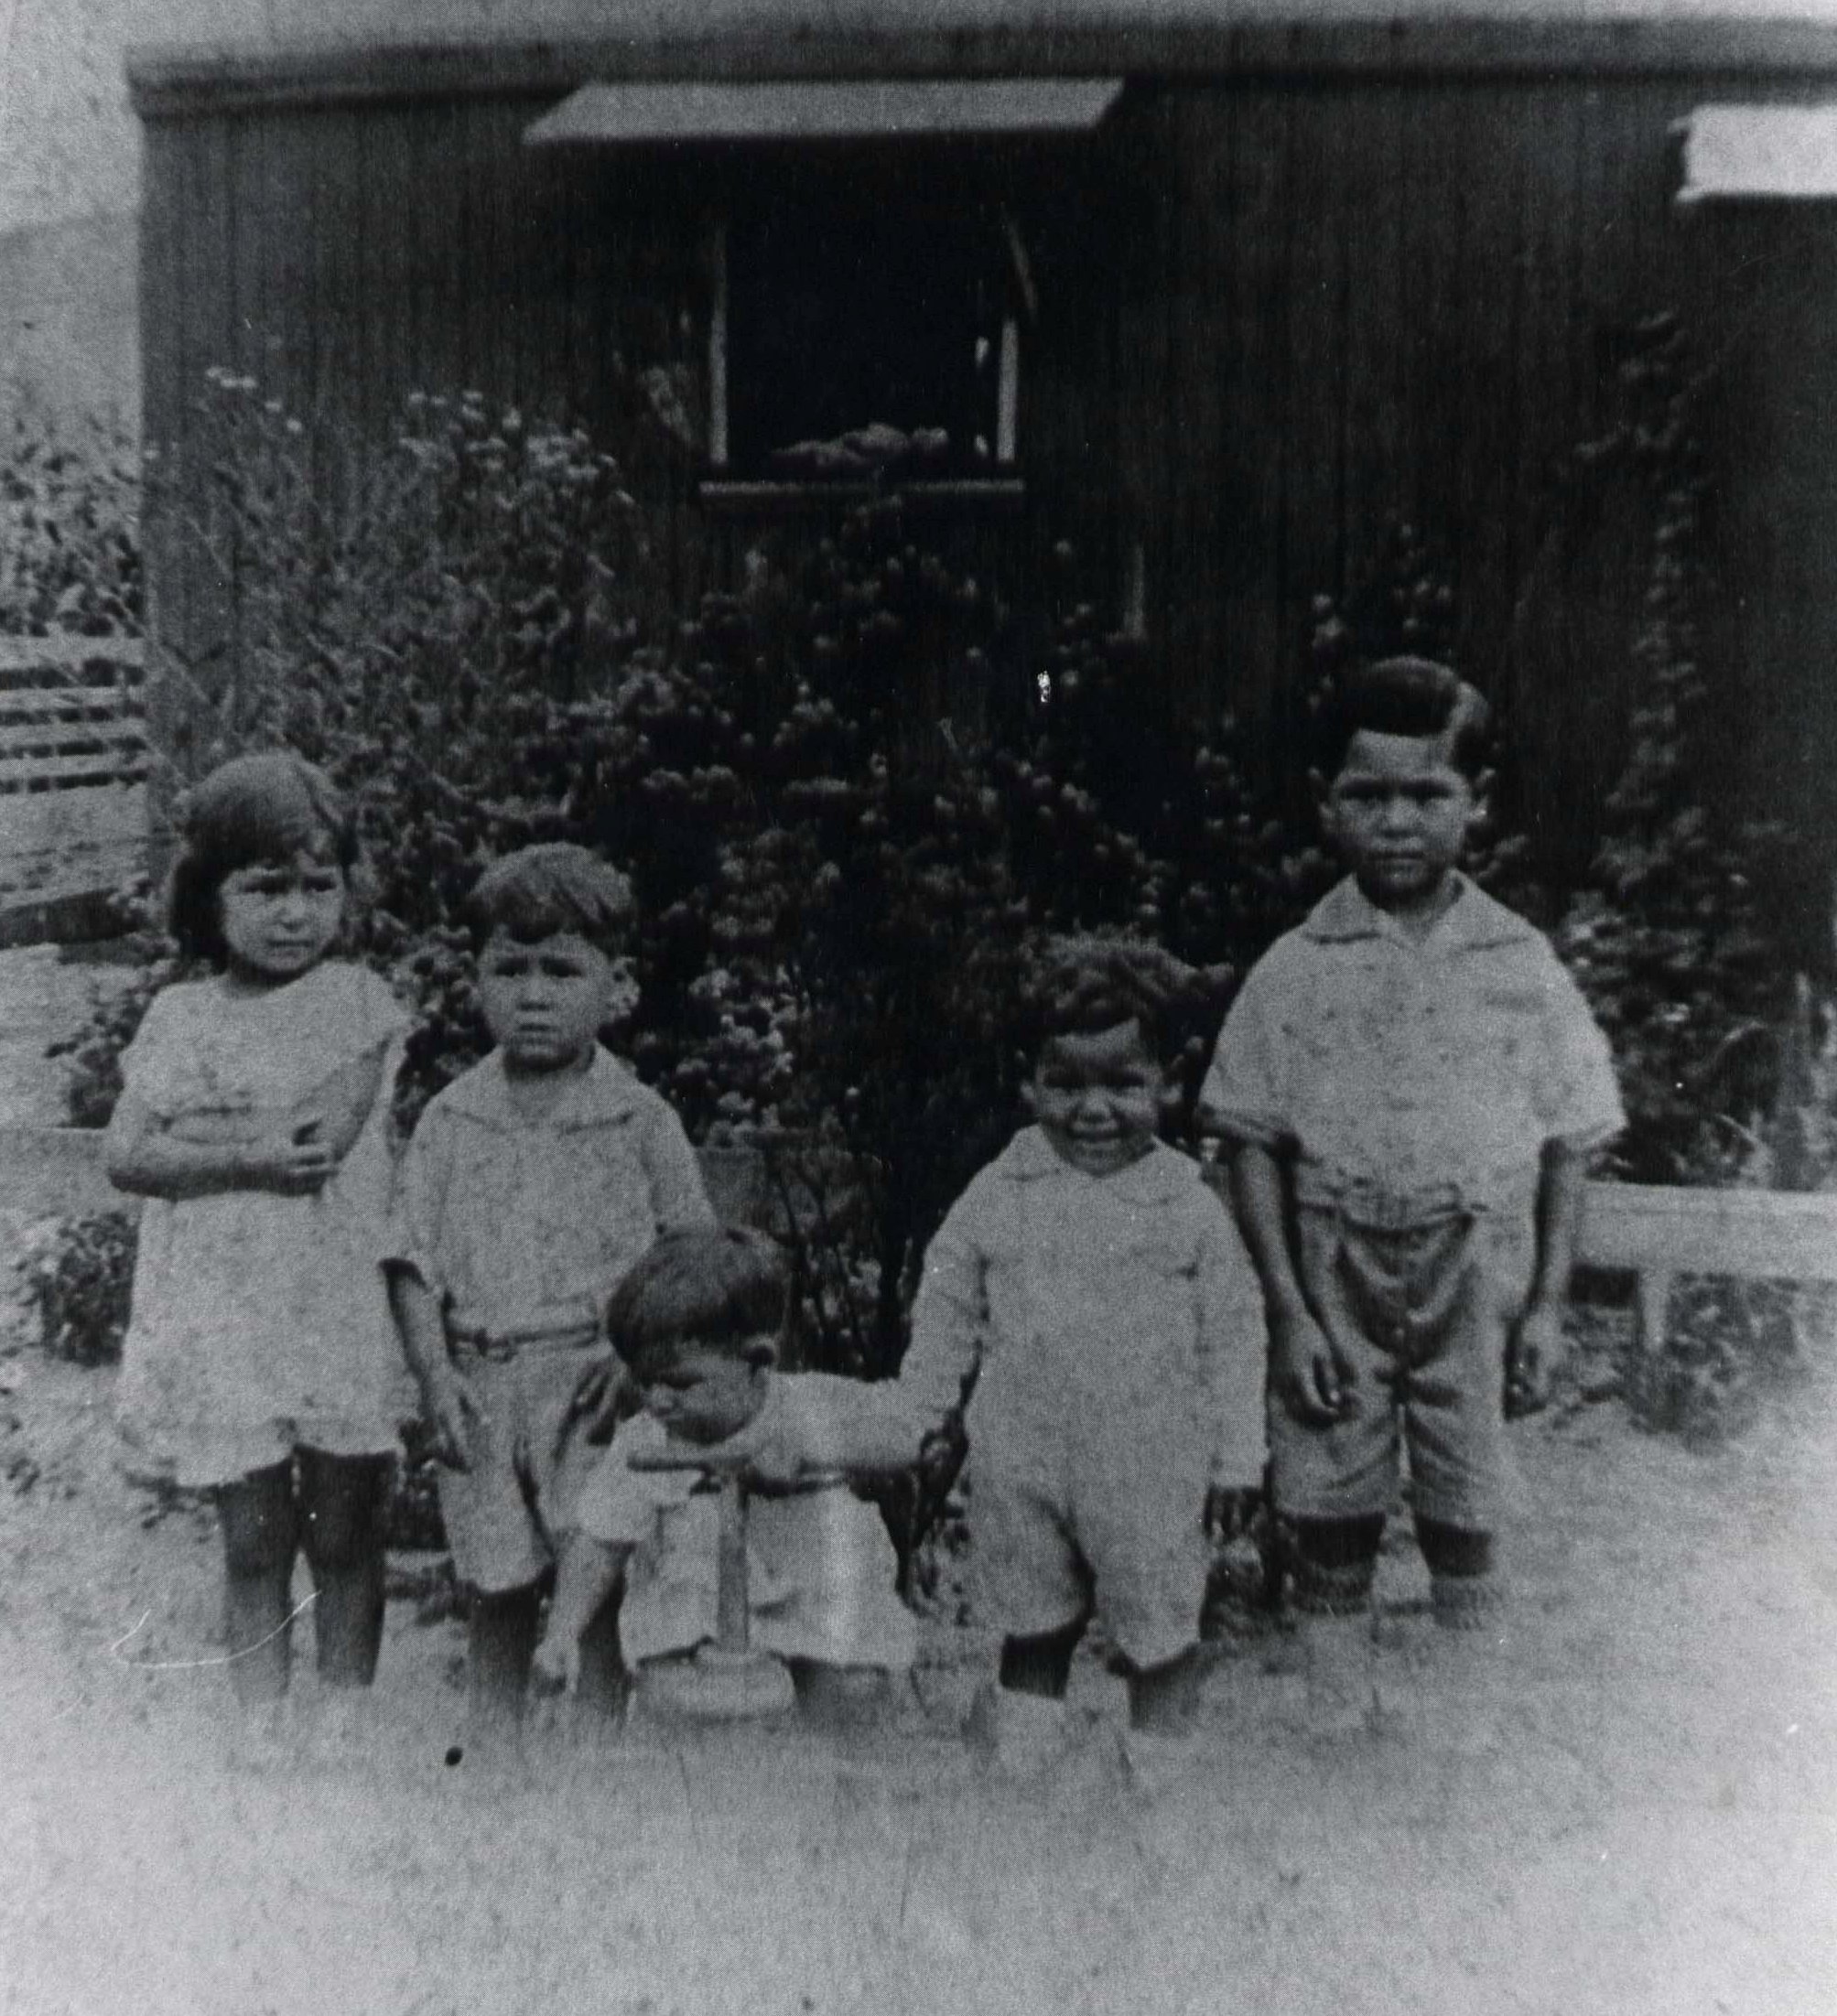 Photo of the Navarro family children outside their boxcar home in 1929. 